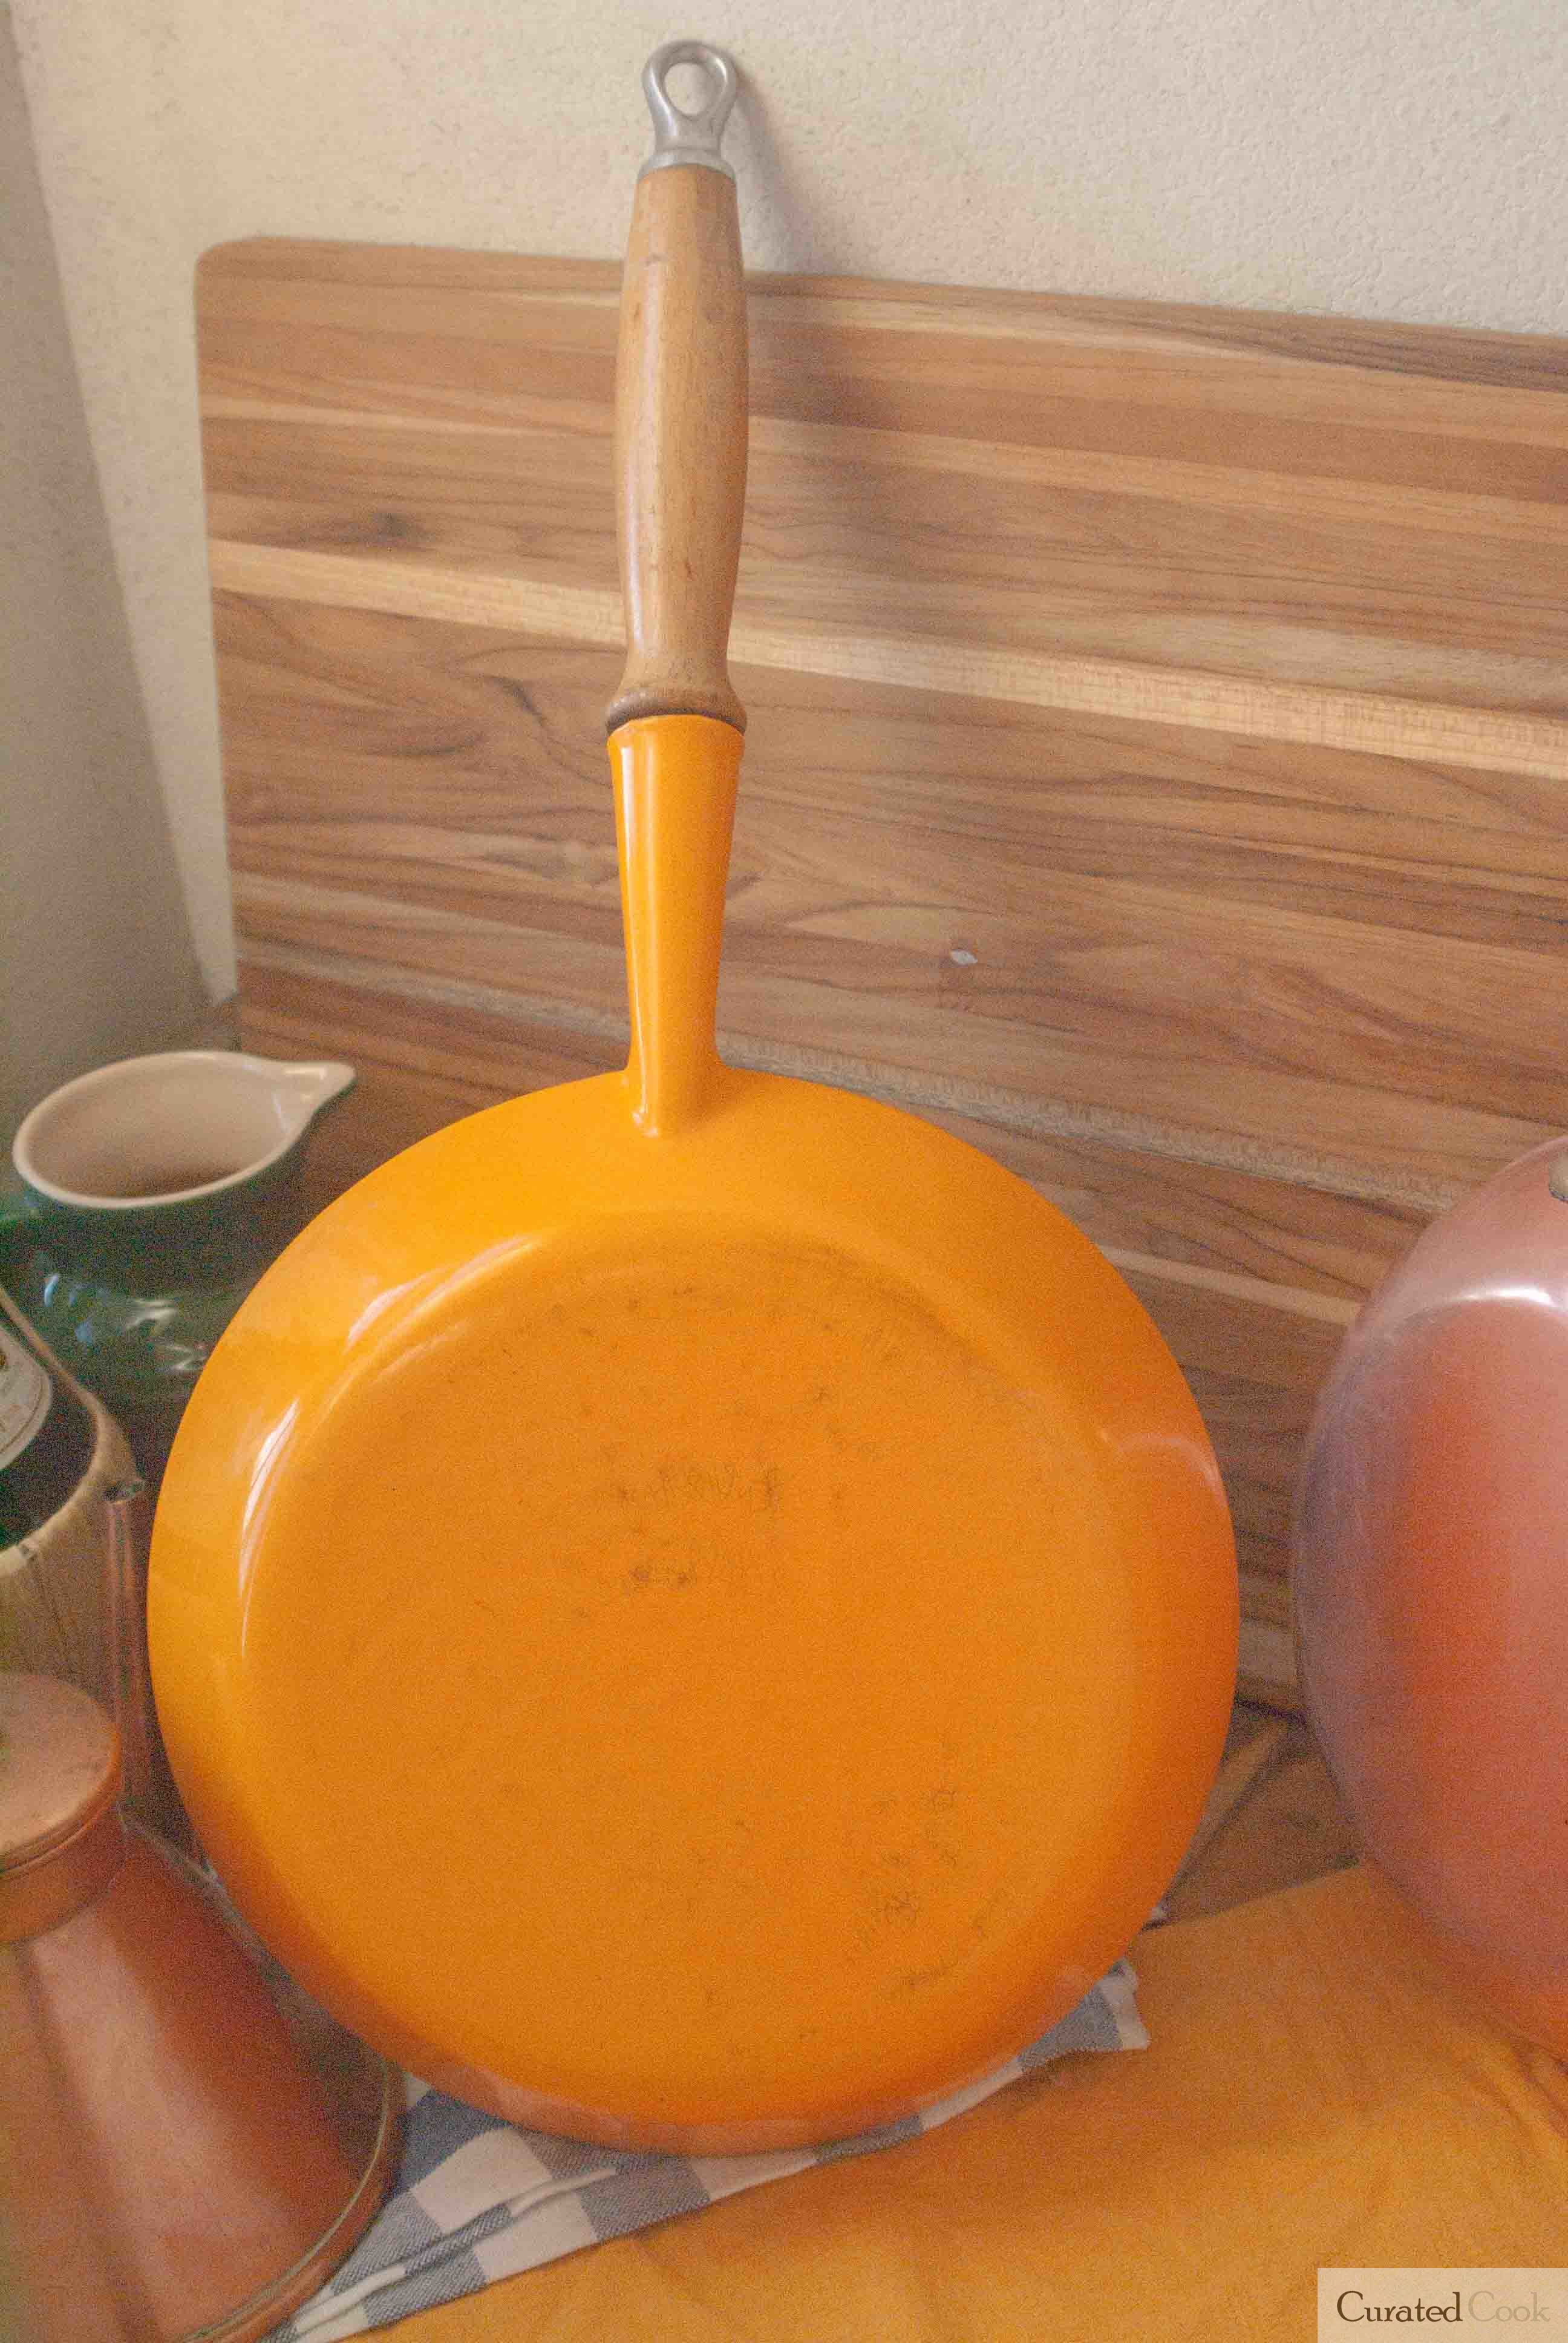 Vintage Le Creuset Skillet Wooden Handle Review Curated Cook